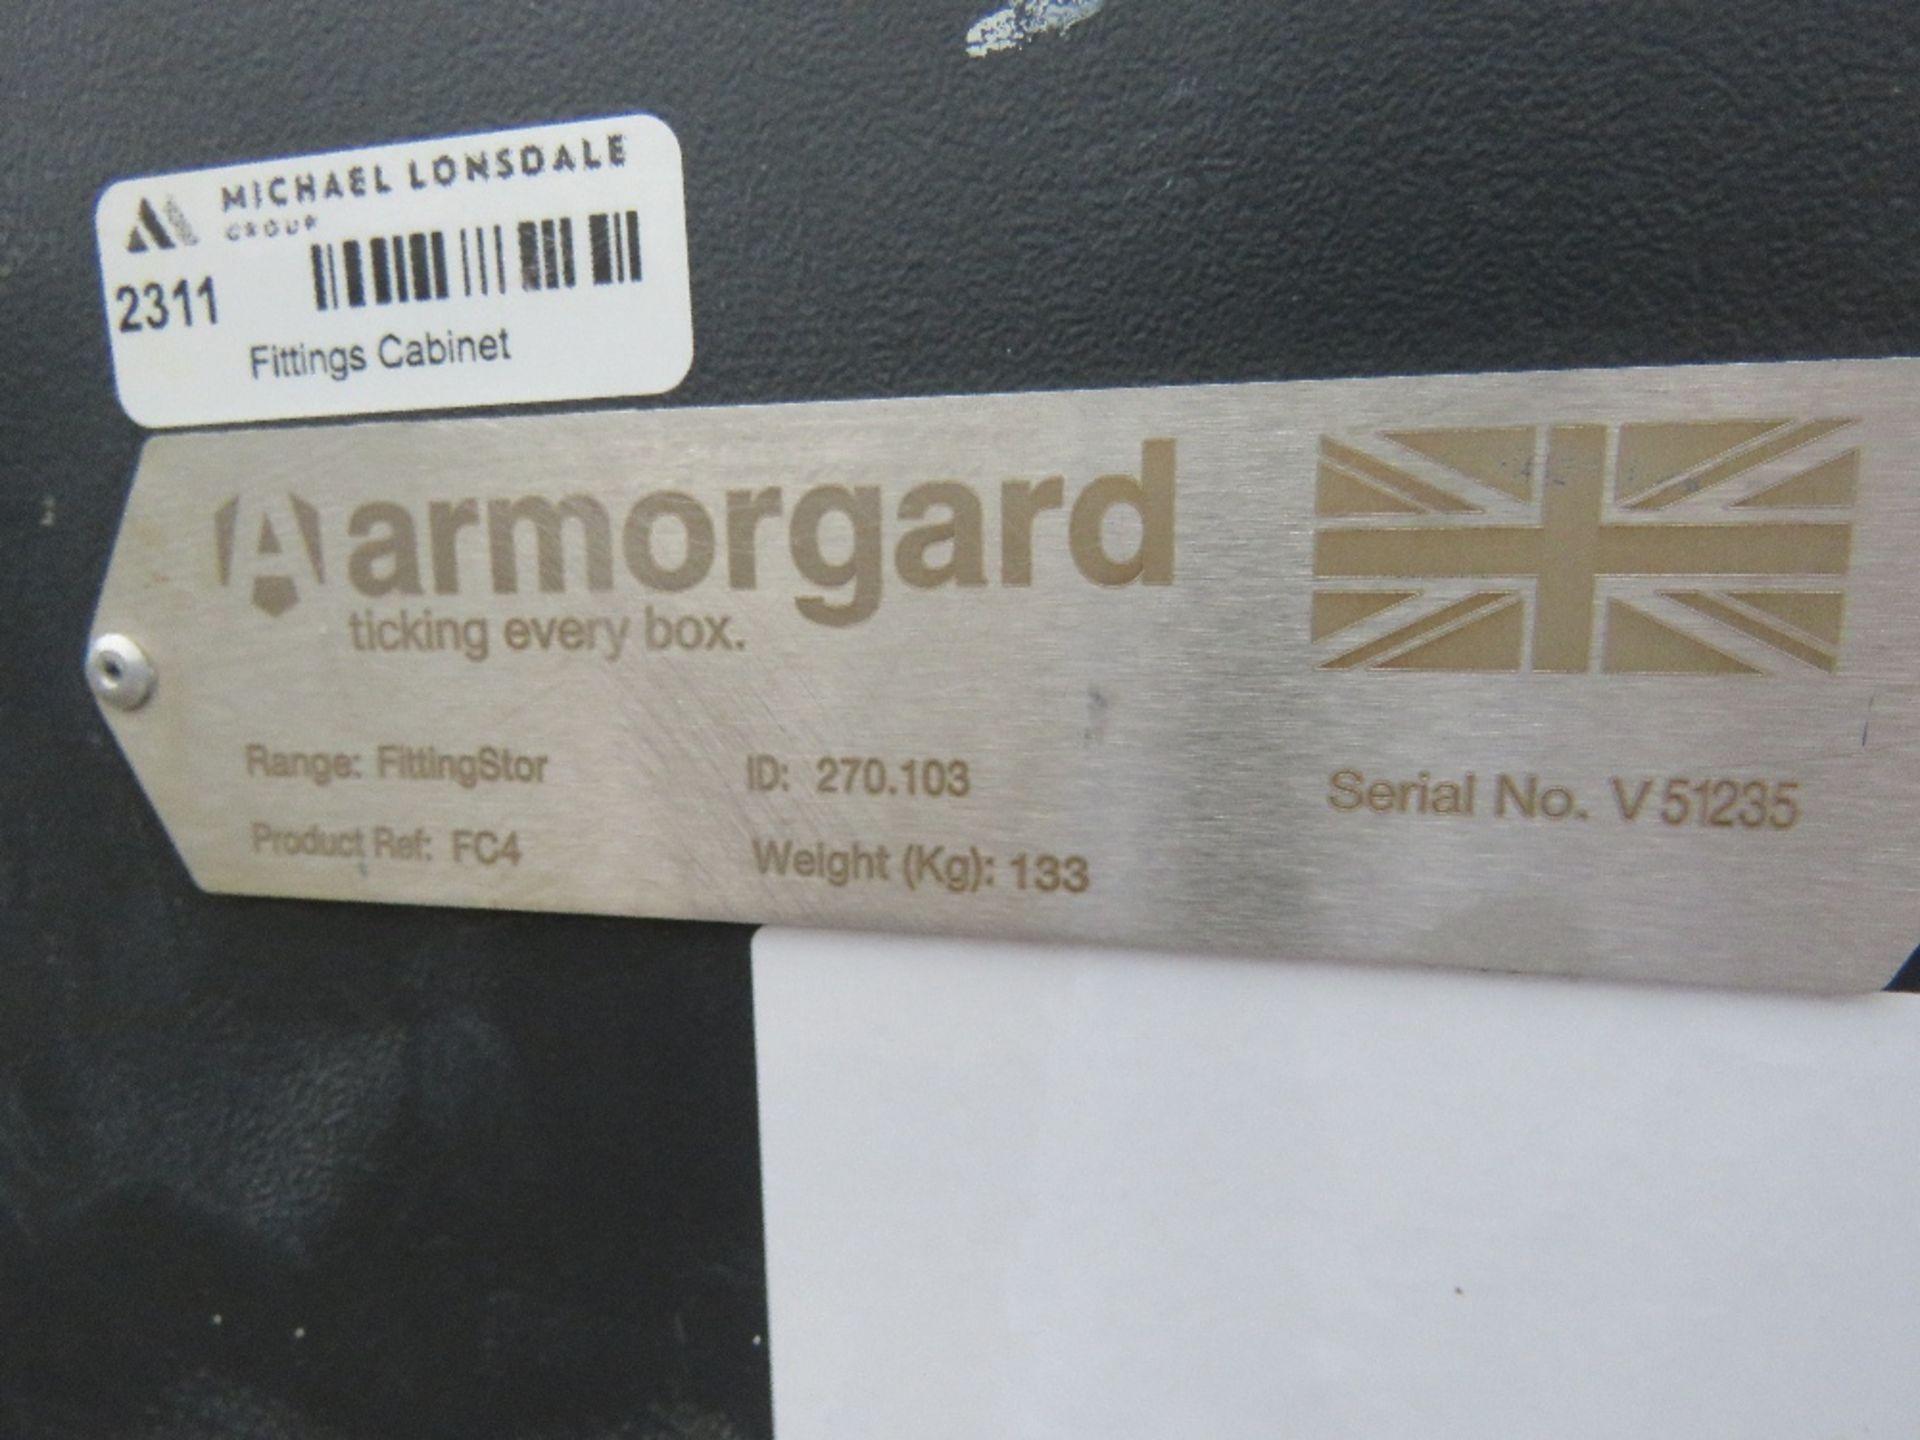 ARMORGARD FITTINGSTOR CABINET WTH KEYS, AS SHOWN. DIRECT FROM COMPANY LIQUIDATION. - Image 4 of 4